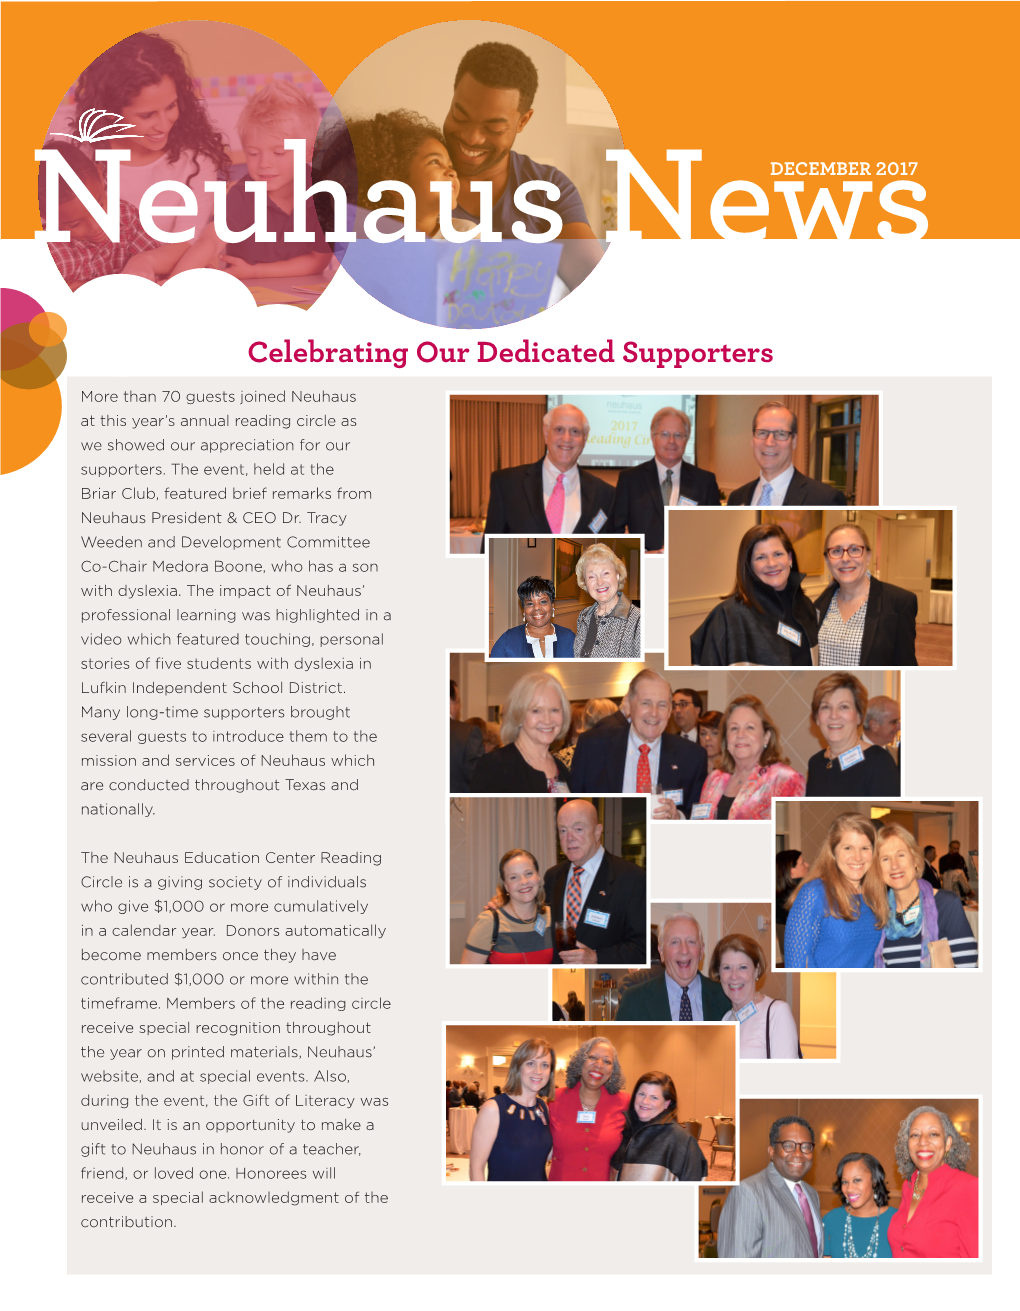 Celebrating Our Dedicated Supporters